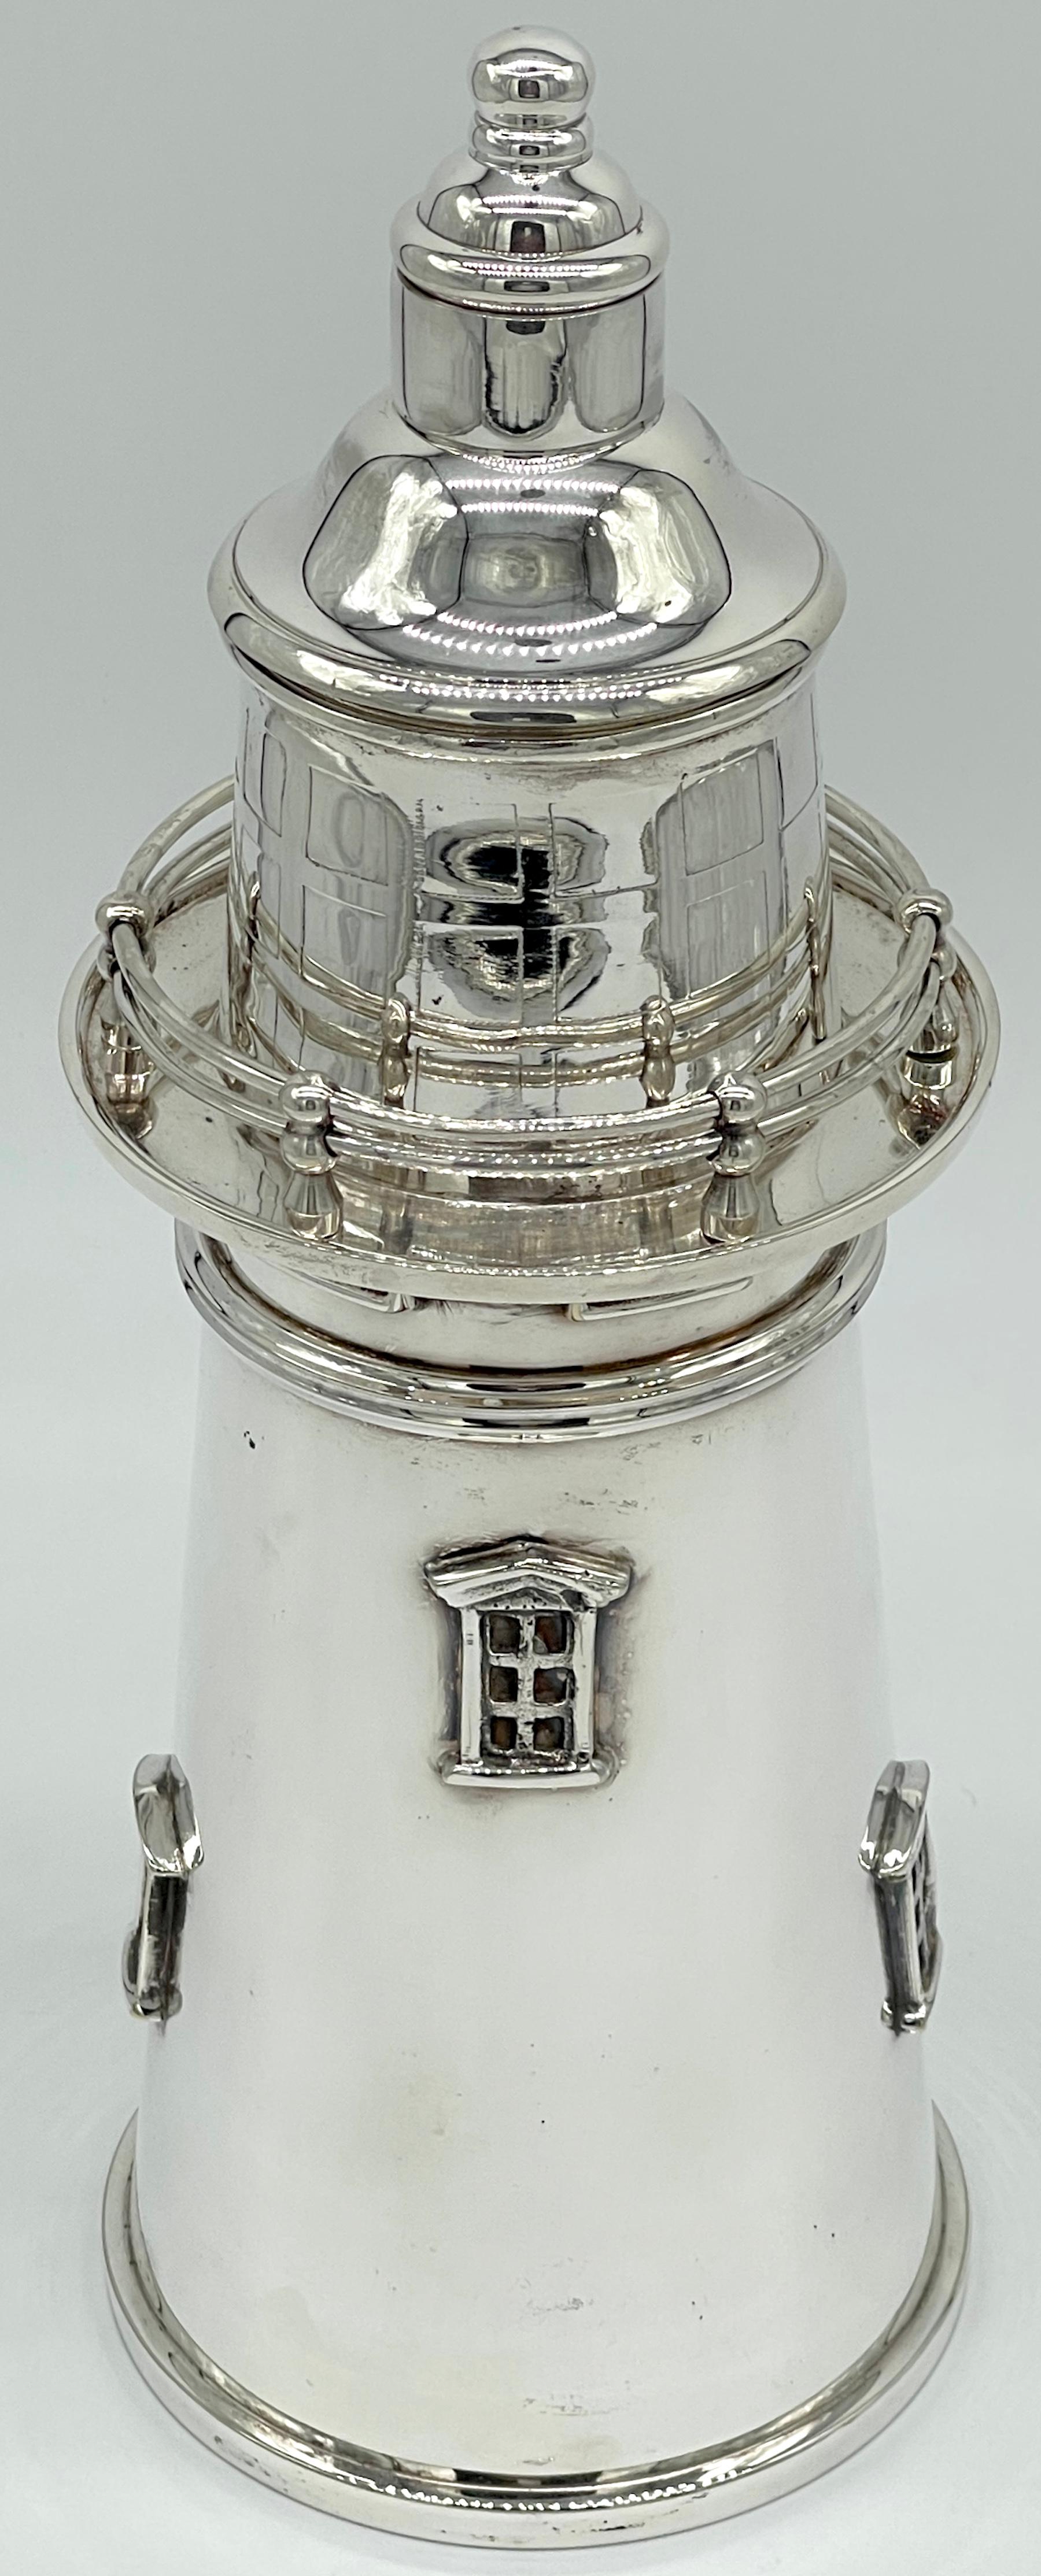 Silverplated Lighthouse Form Cocktail Shaker Style of James Deakin & Sons
England, 20th century 

A magnificent silver-plated lighthouse-form cocktail shaker made in the iconic style of James Deakin & Sons from 20th-century England. This remarkable